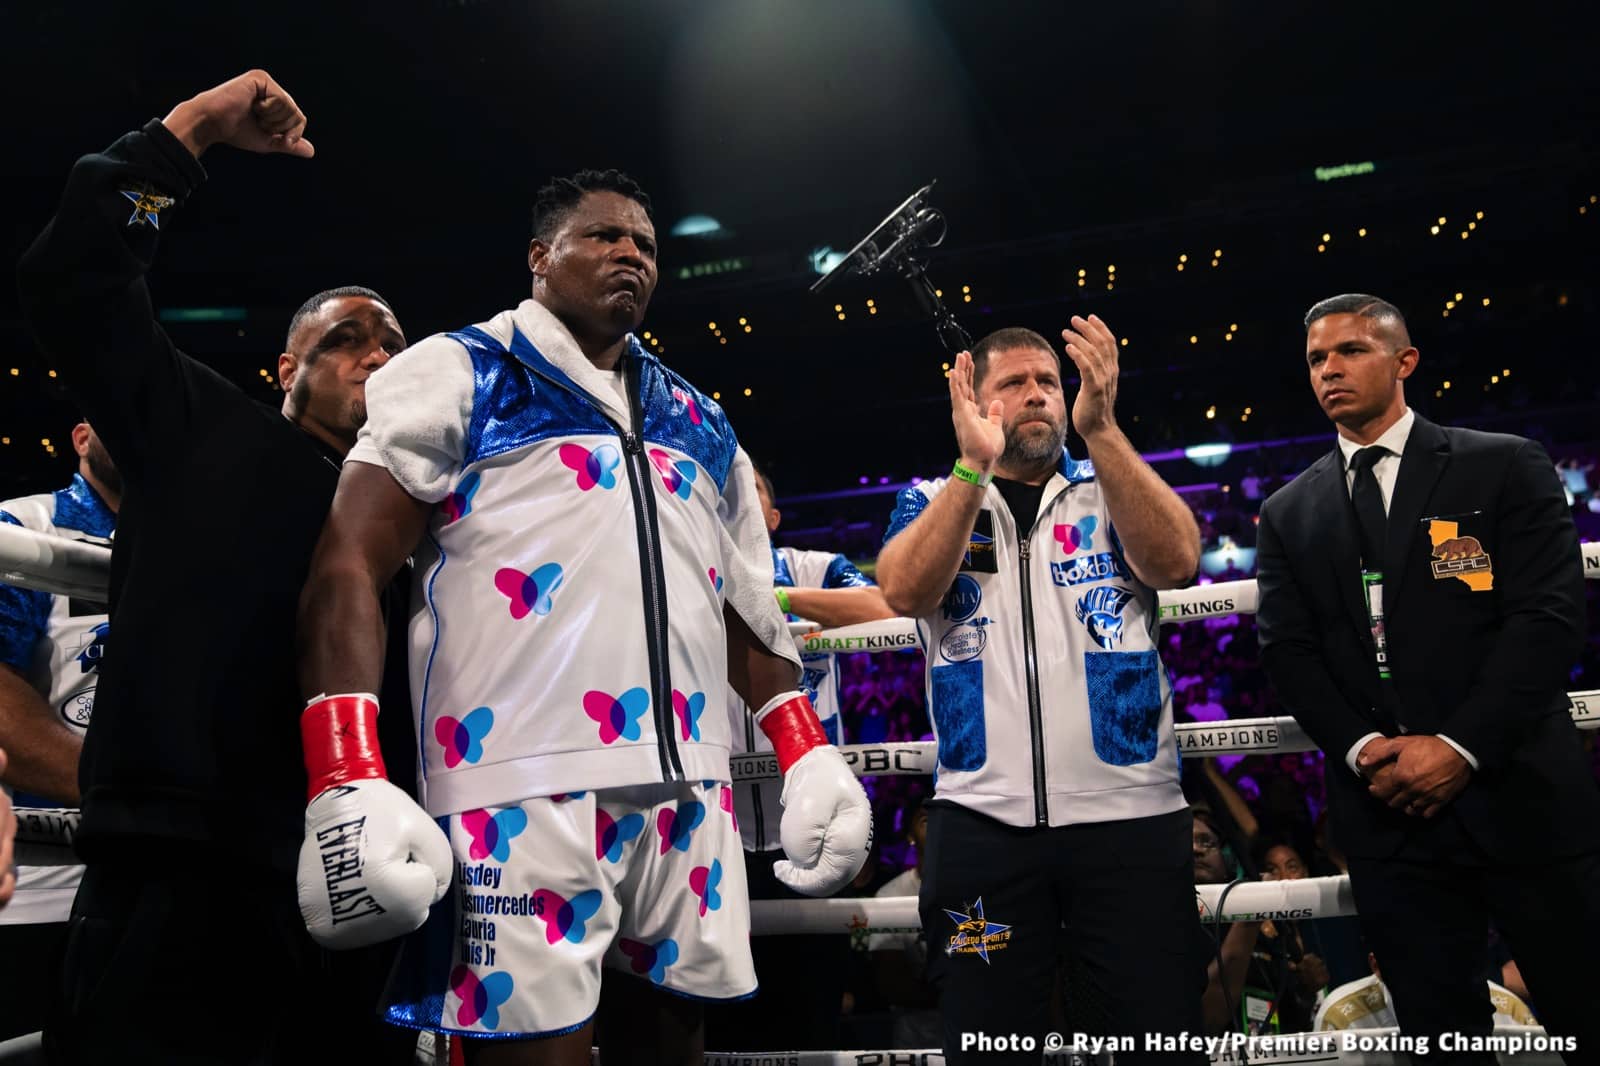 Andy Ruiz Jr defeats Luis Ortiz by 12 round decision - Boxing Results